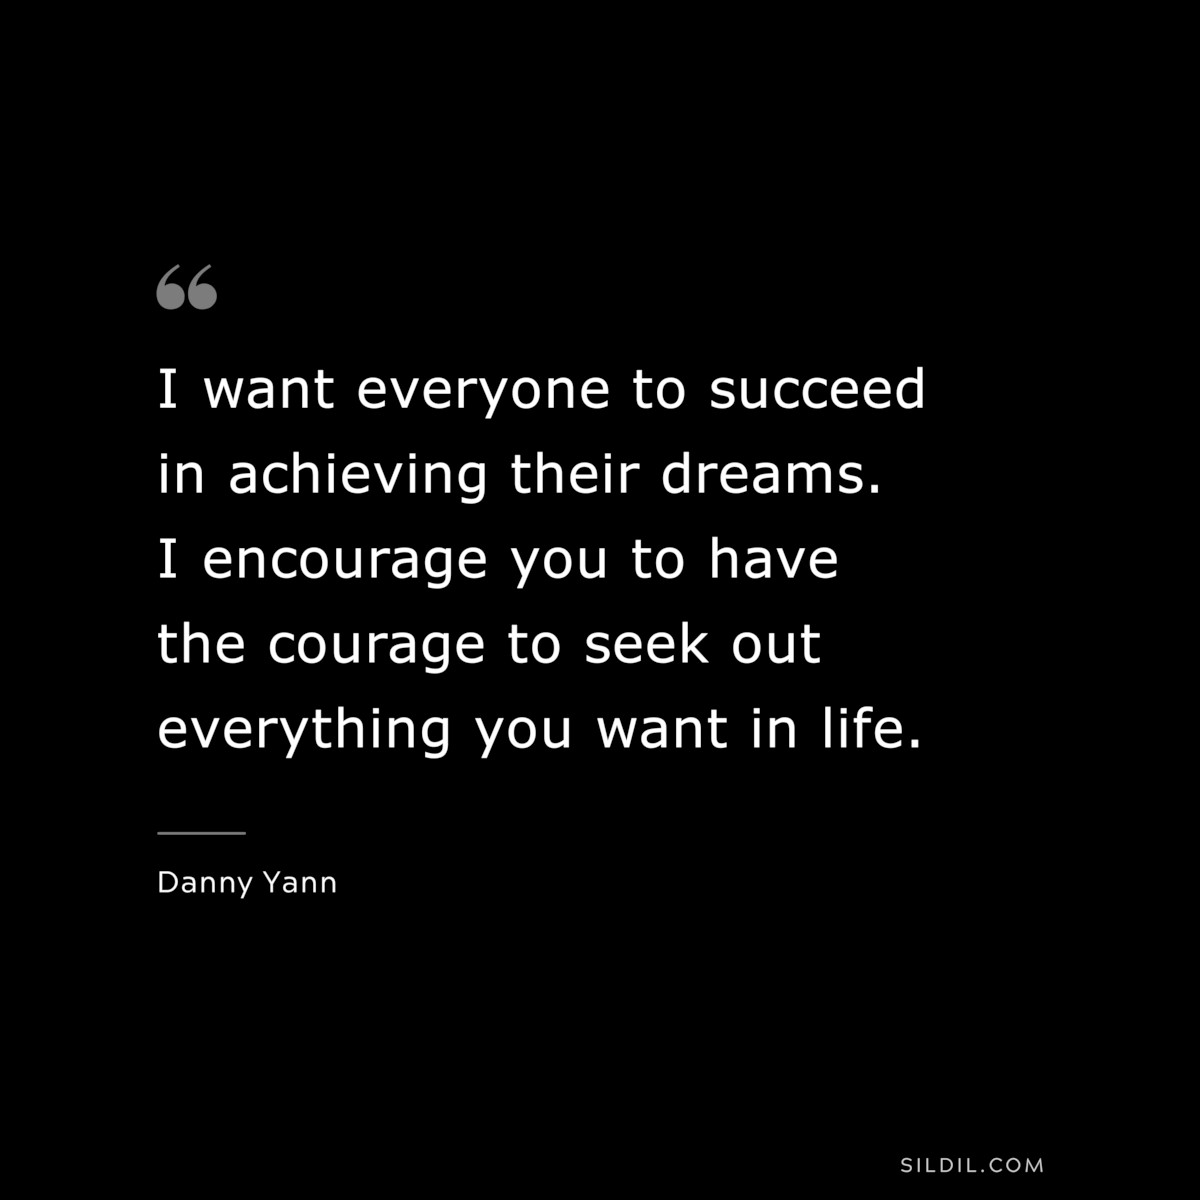 I want everyone to succeed in achieving their dreams. I encourage you to have the courage to seek out everything you want in life. ― Danny Yann